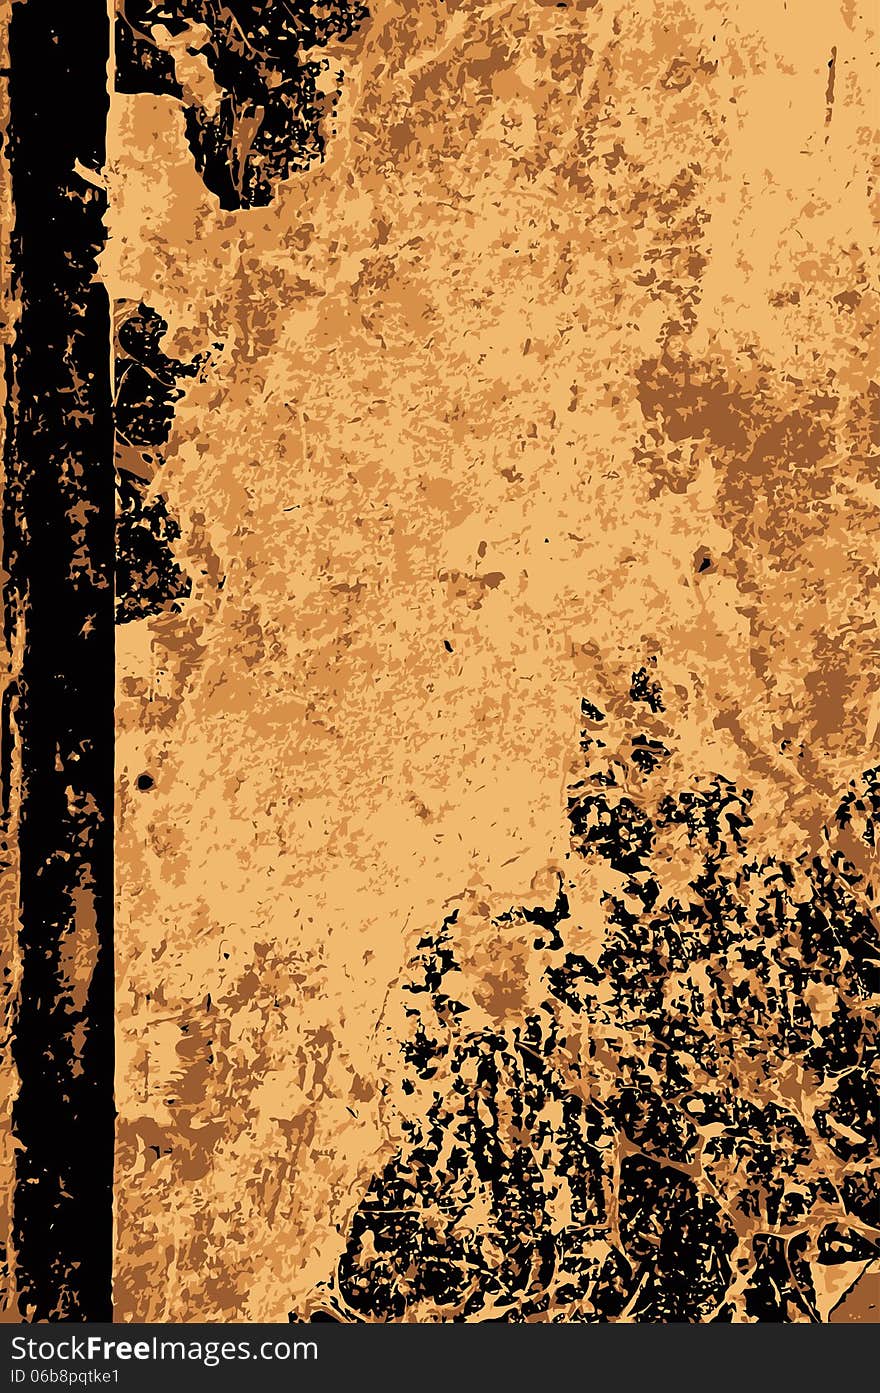 Battered old book cover with spots and stains (vector)